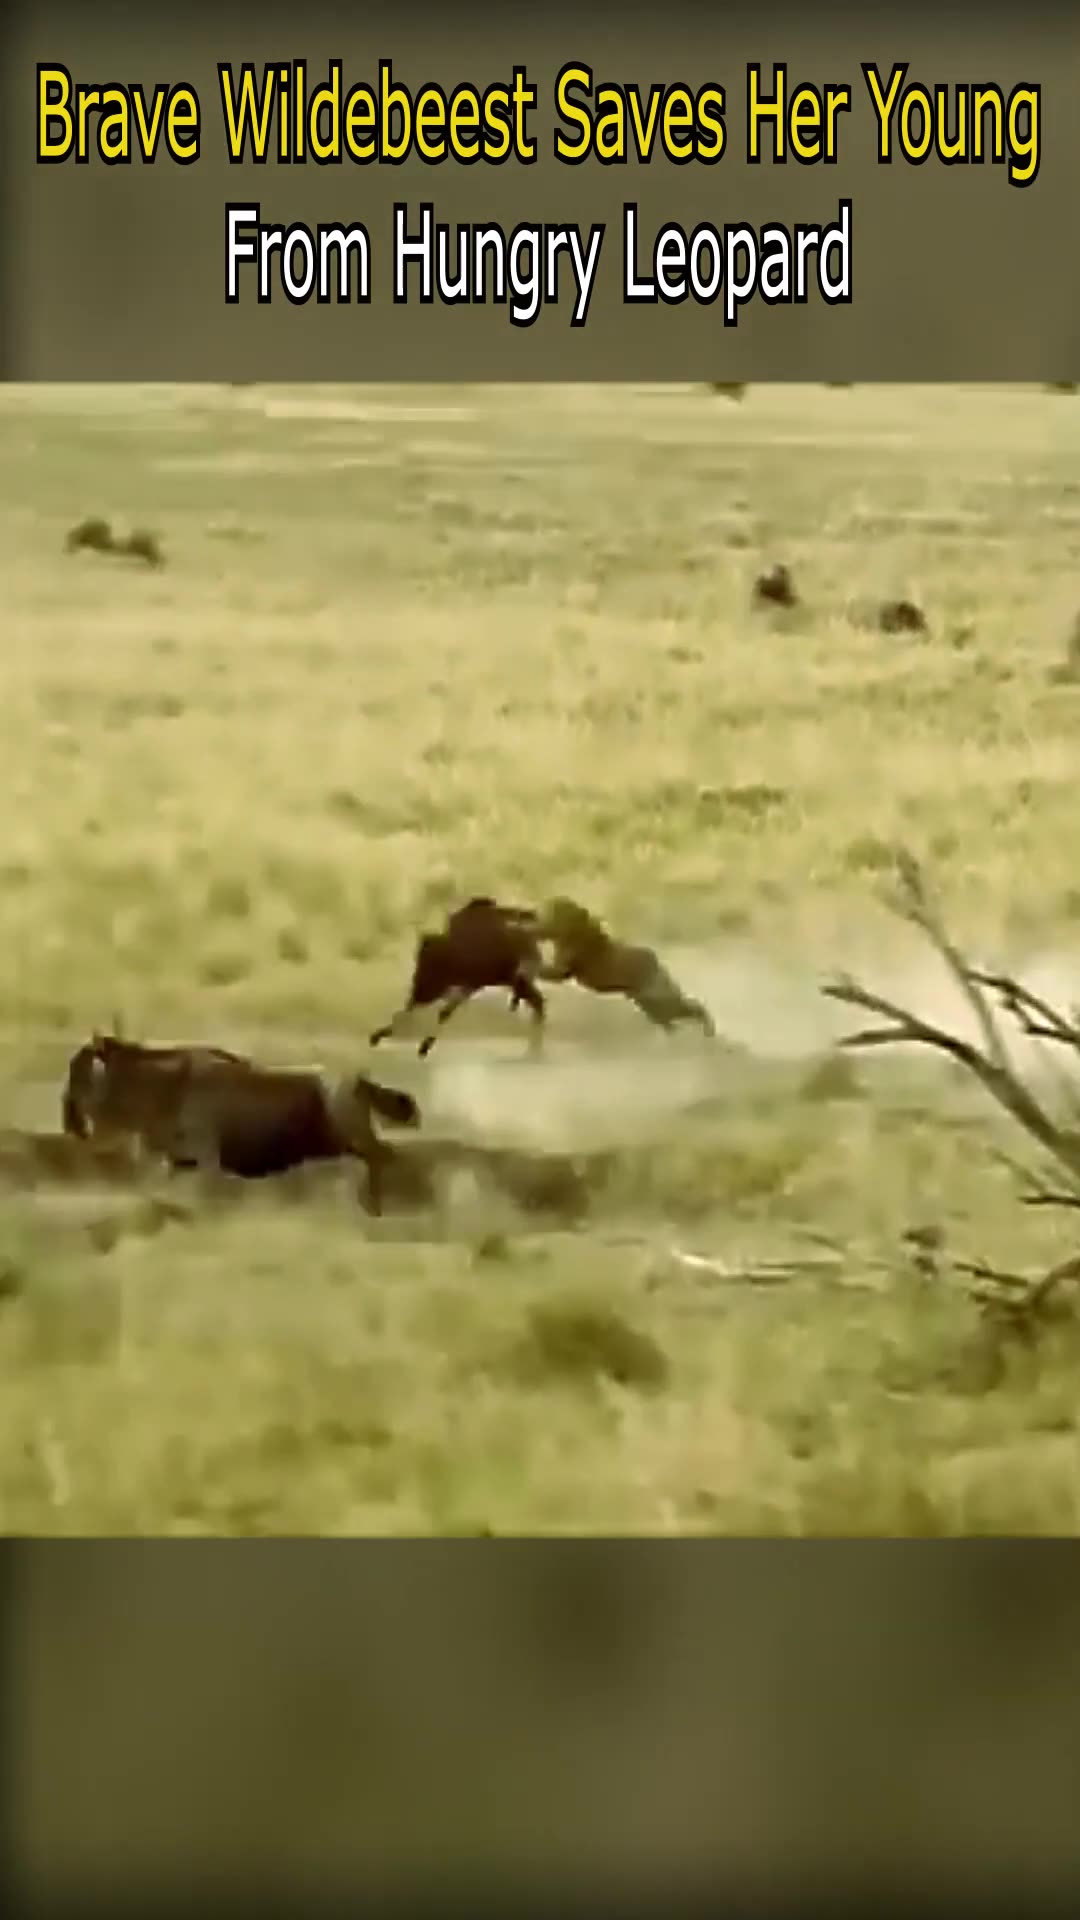 Brave Wildebeest Saves Her Young From Hungry Leopard